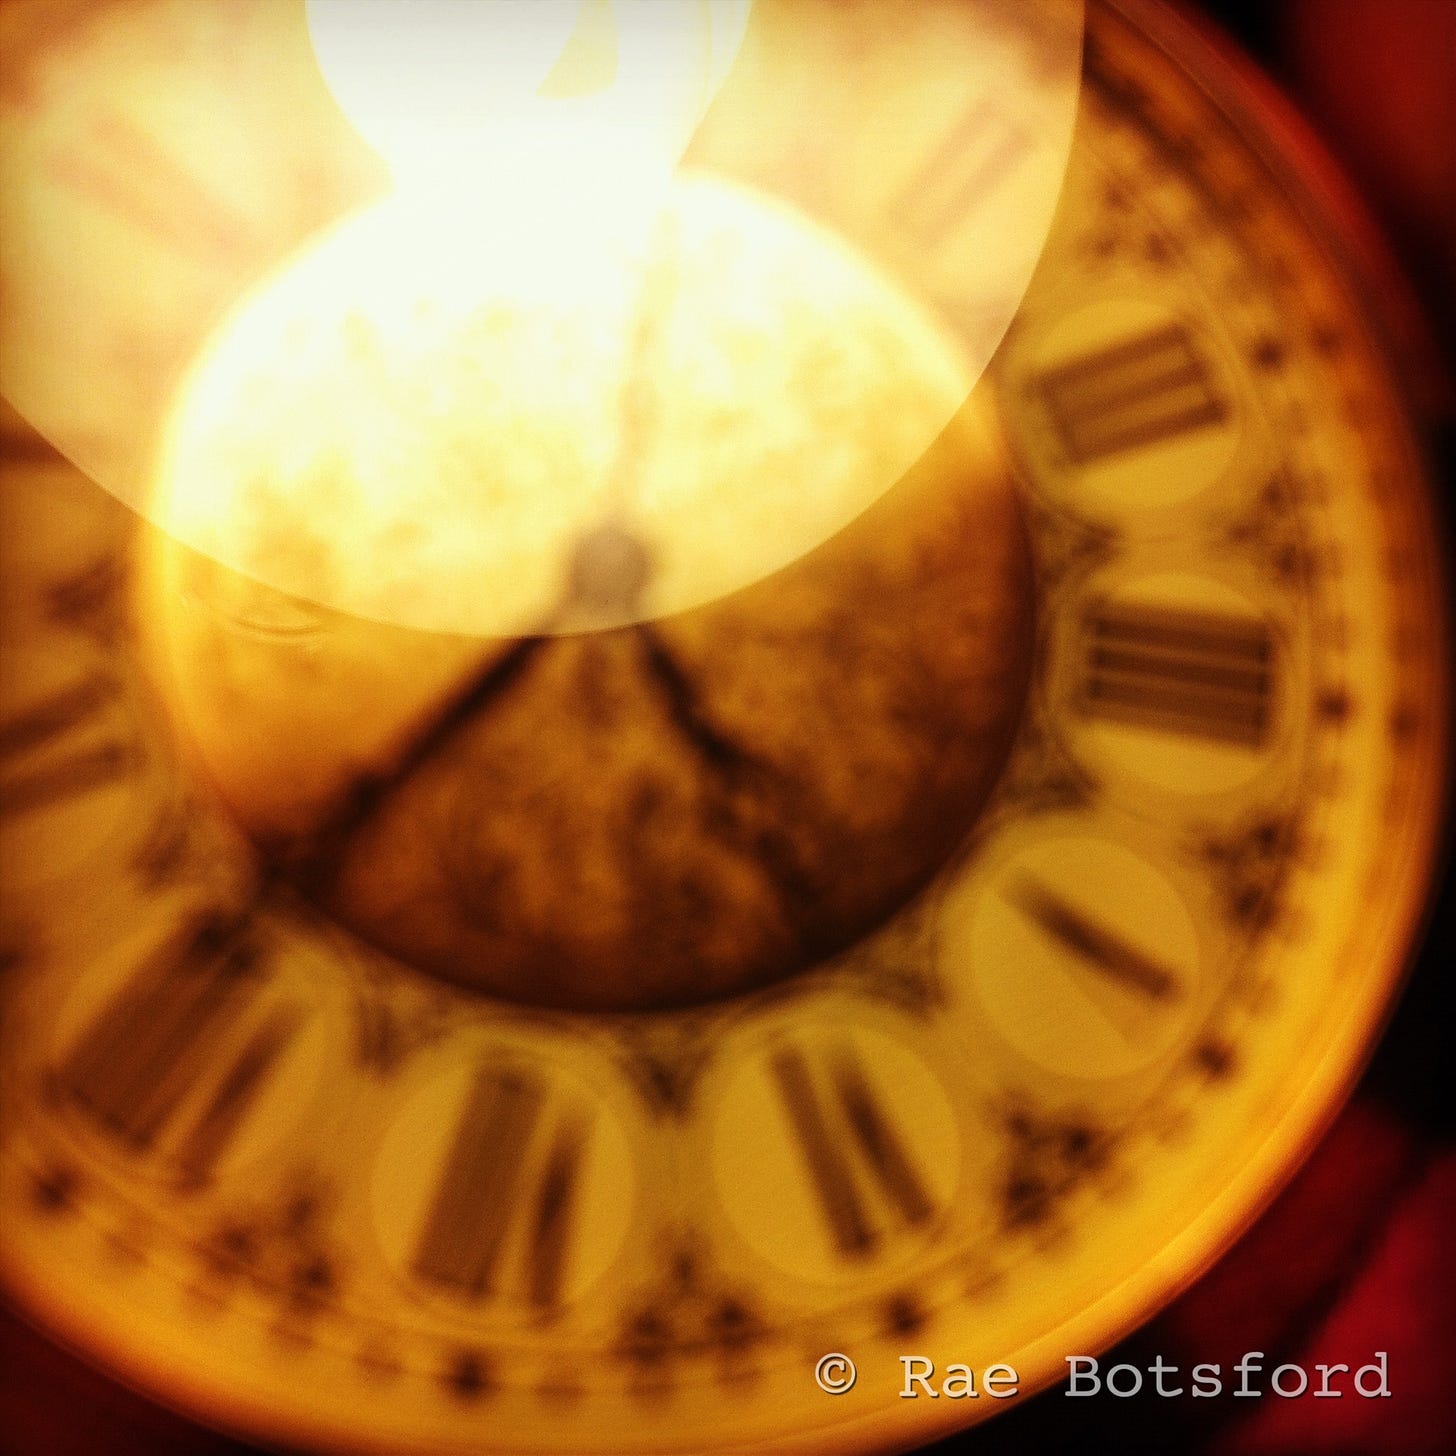 blurry image of clock with Roman numerals, watermarked Rae Botsford